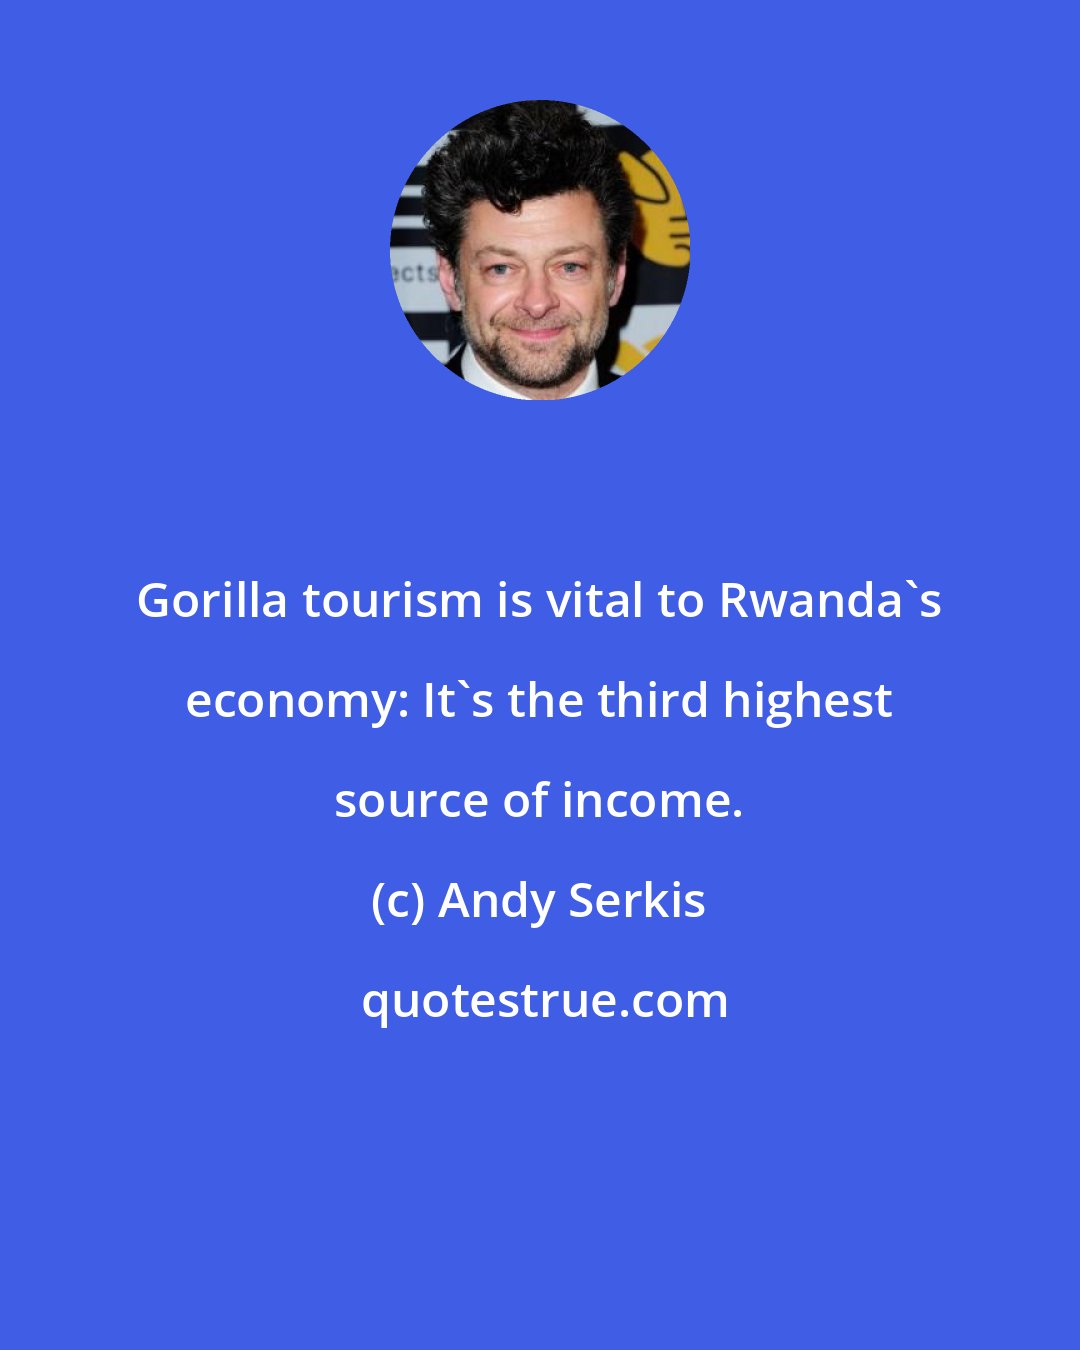 Andy Serkis: Gorilla tourism is vital to Rwanda's economy: It's the third highest source of income.